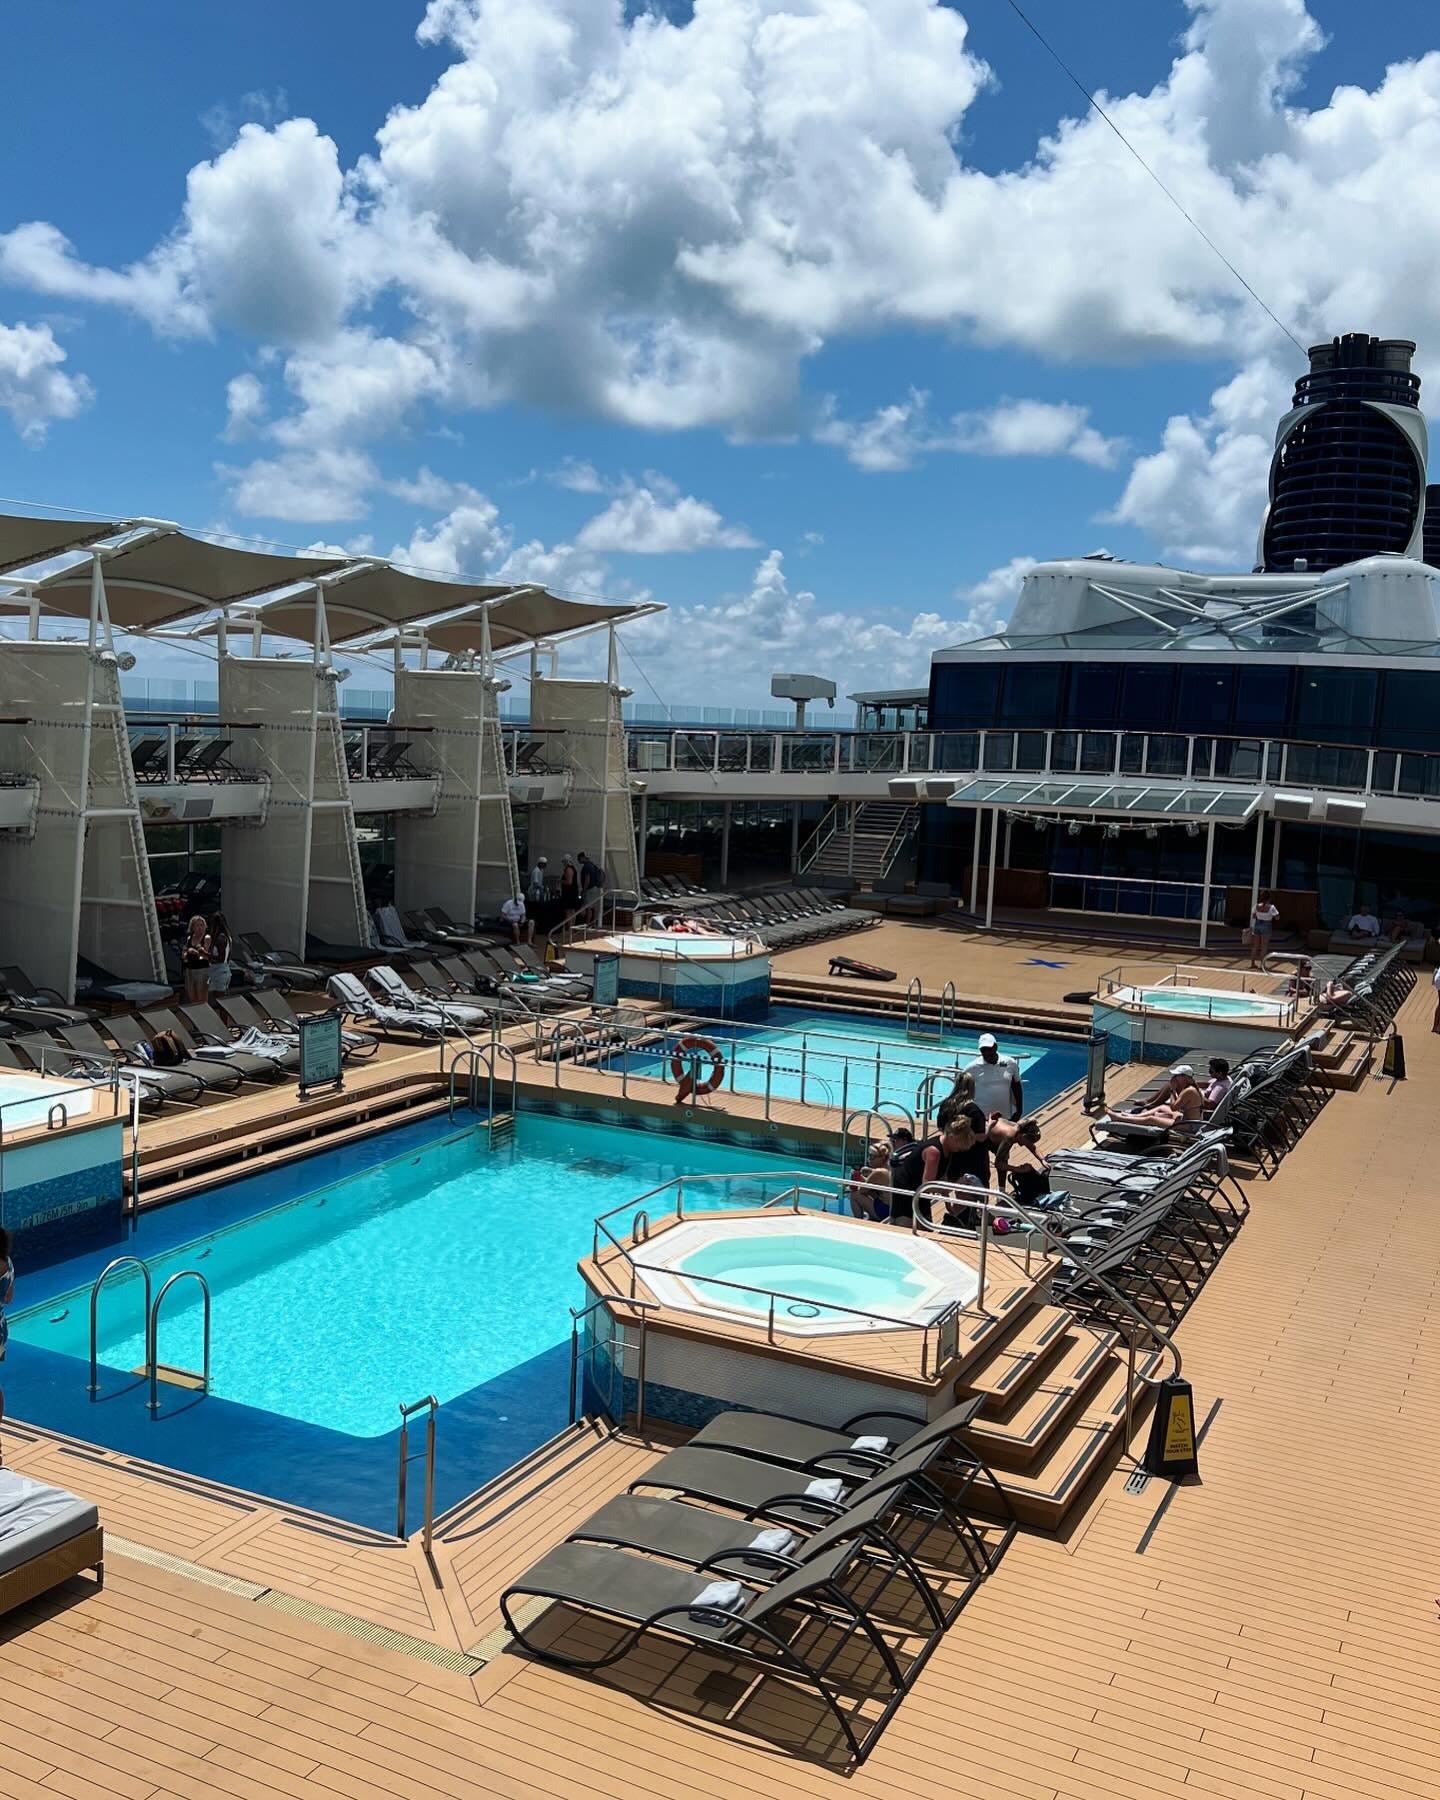 INVITED &bull; I spent the morning at Port Everglades for a quick ship tour of the Celebrity Reflection. I was invited as an Independent Travel Advisor.

Celebrity Reflection is the last of five Solstice-class cruise ships. Her maiden voyage was in 2